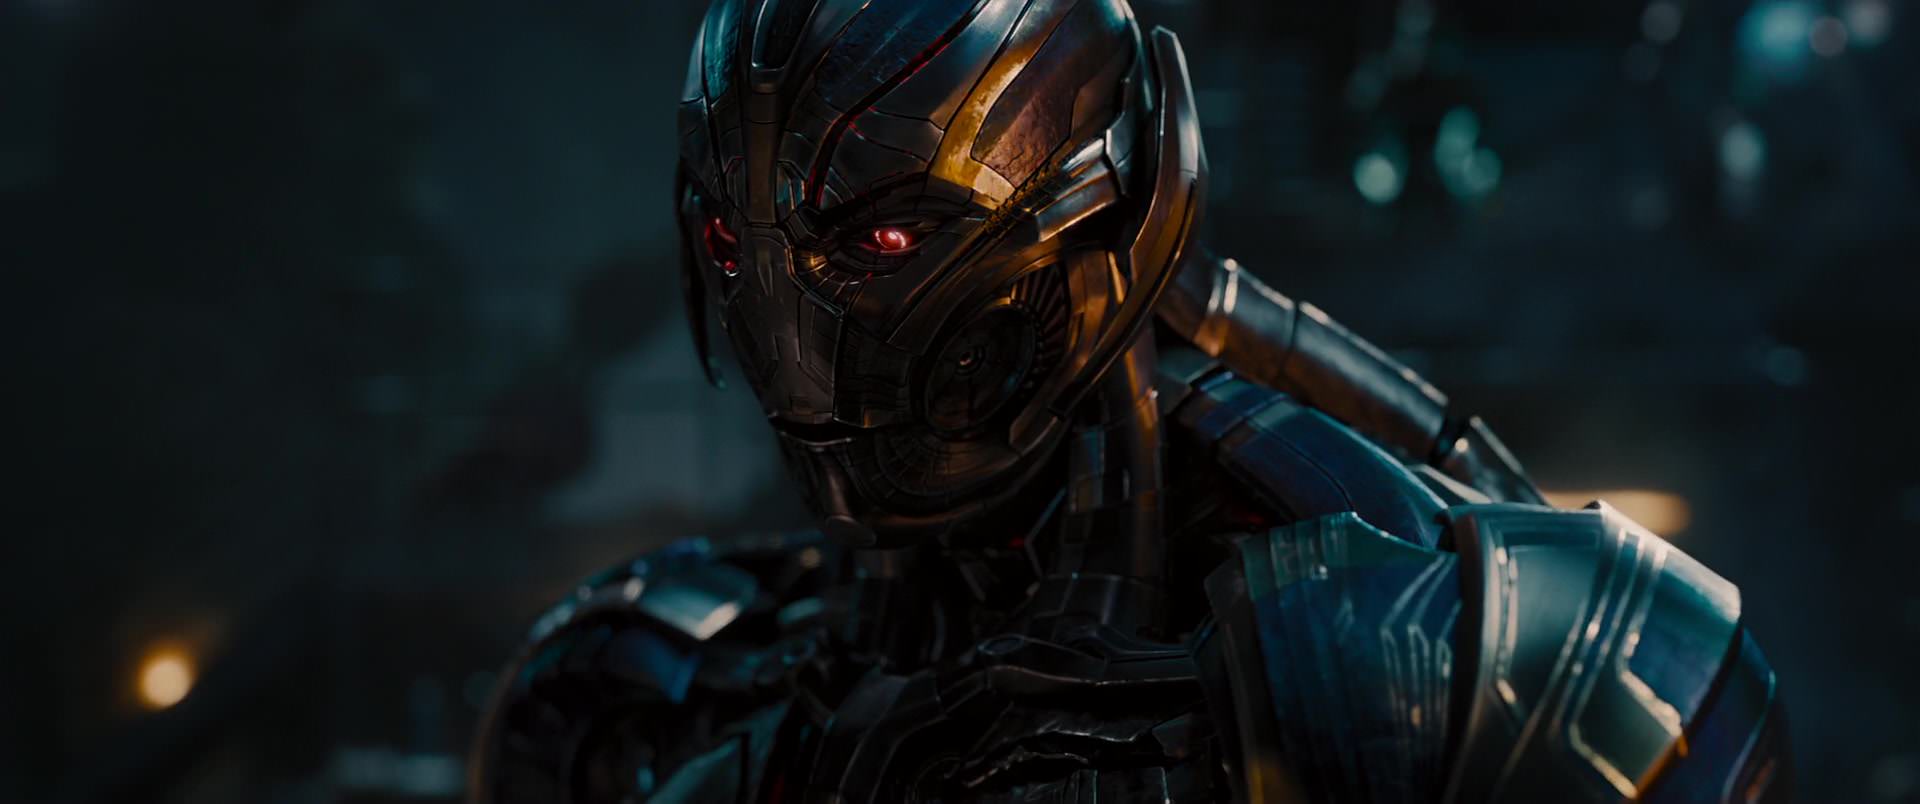 avengers age of ultron full movie in hindi download 720p google drive